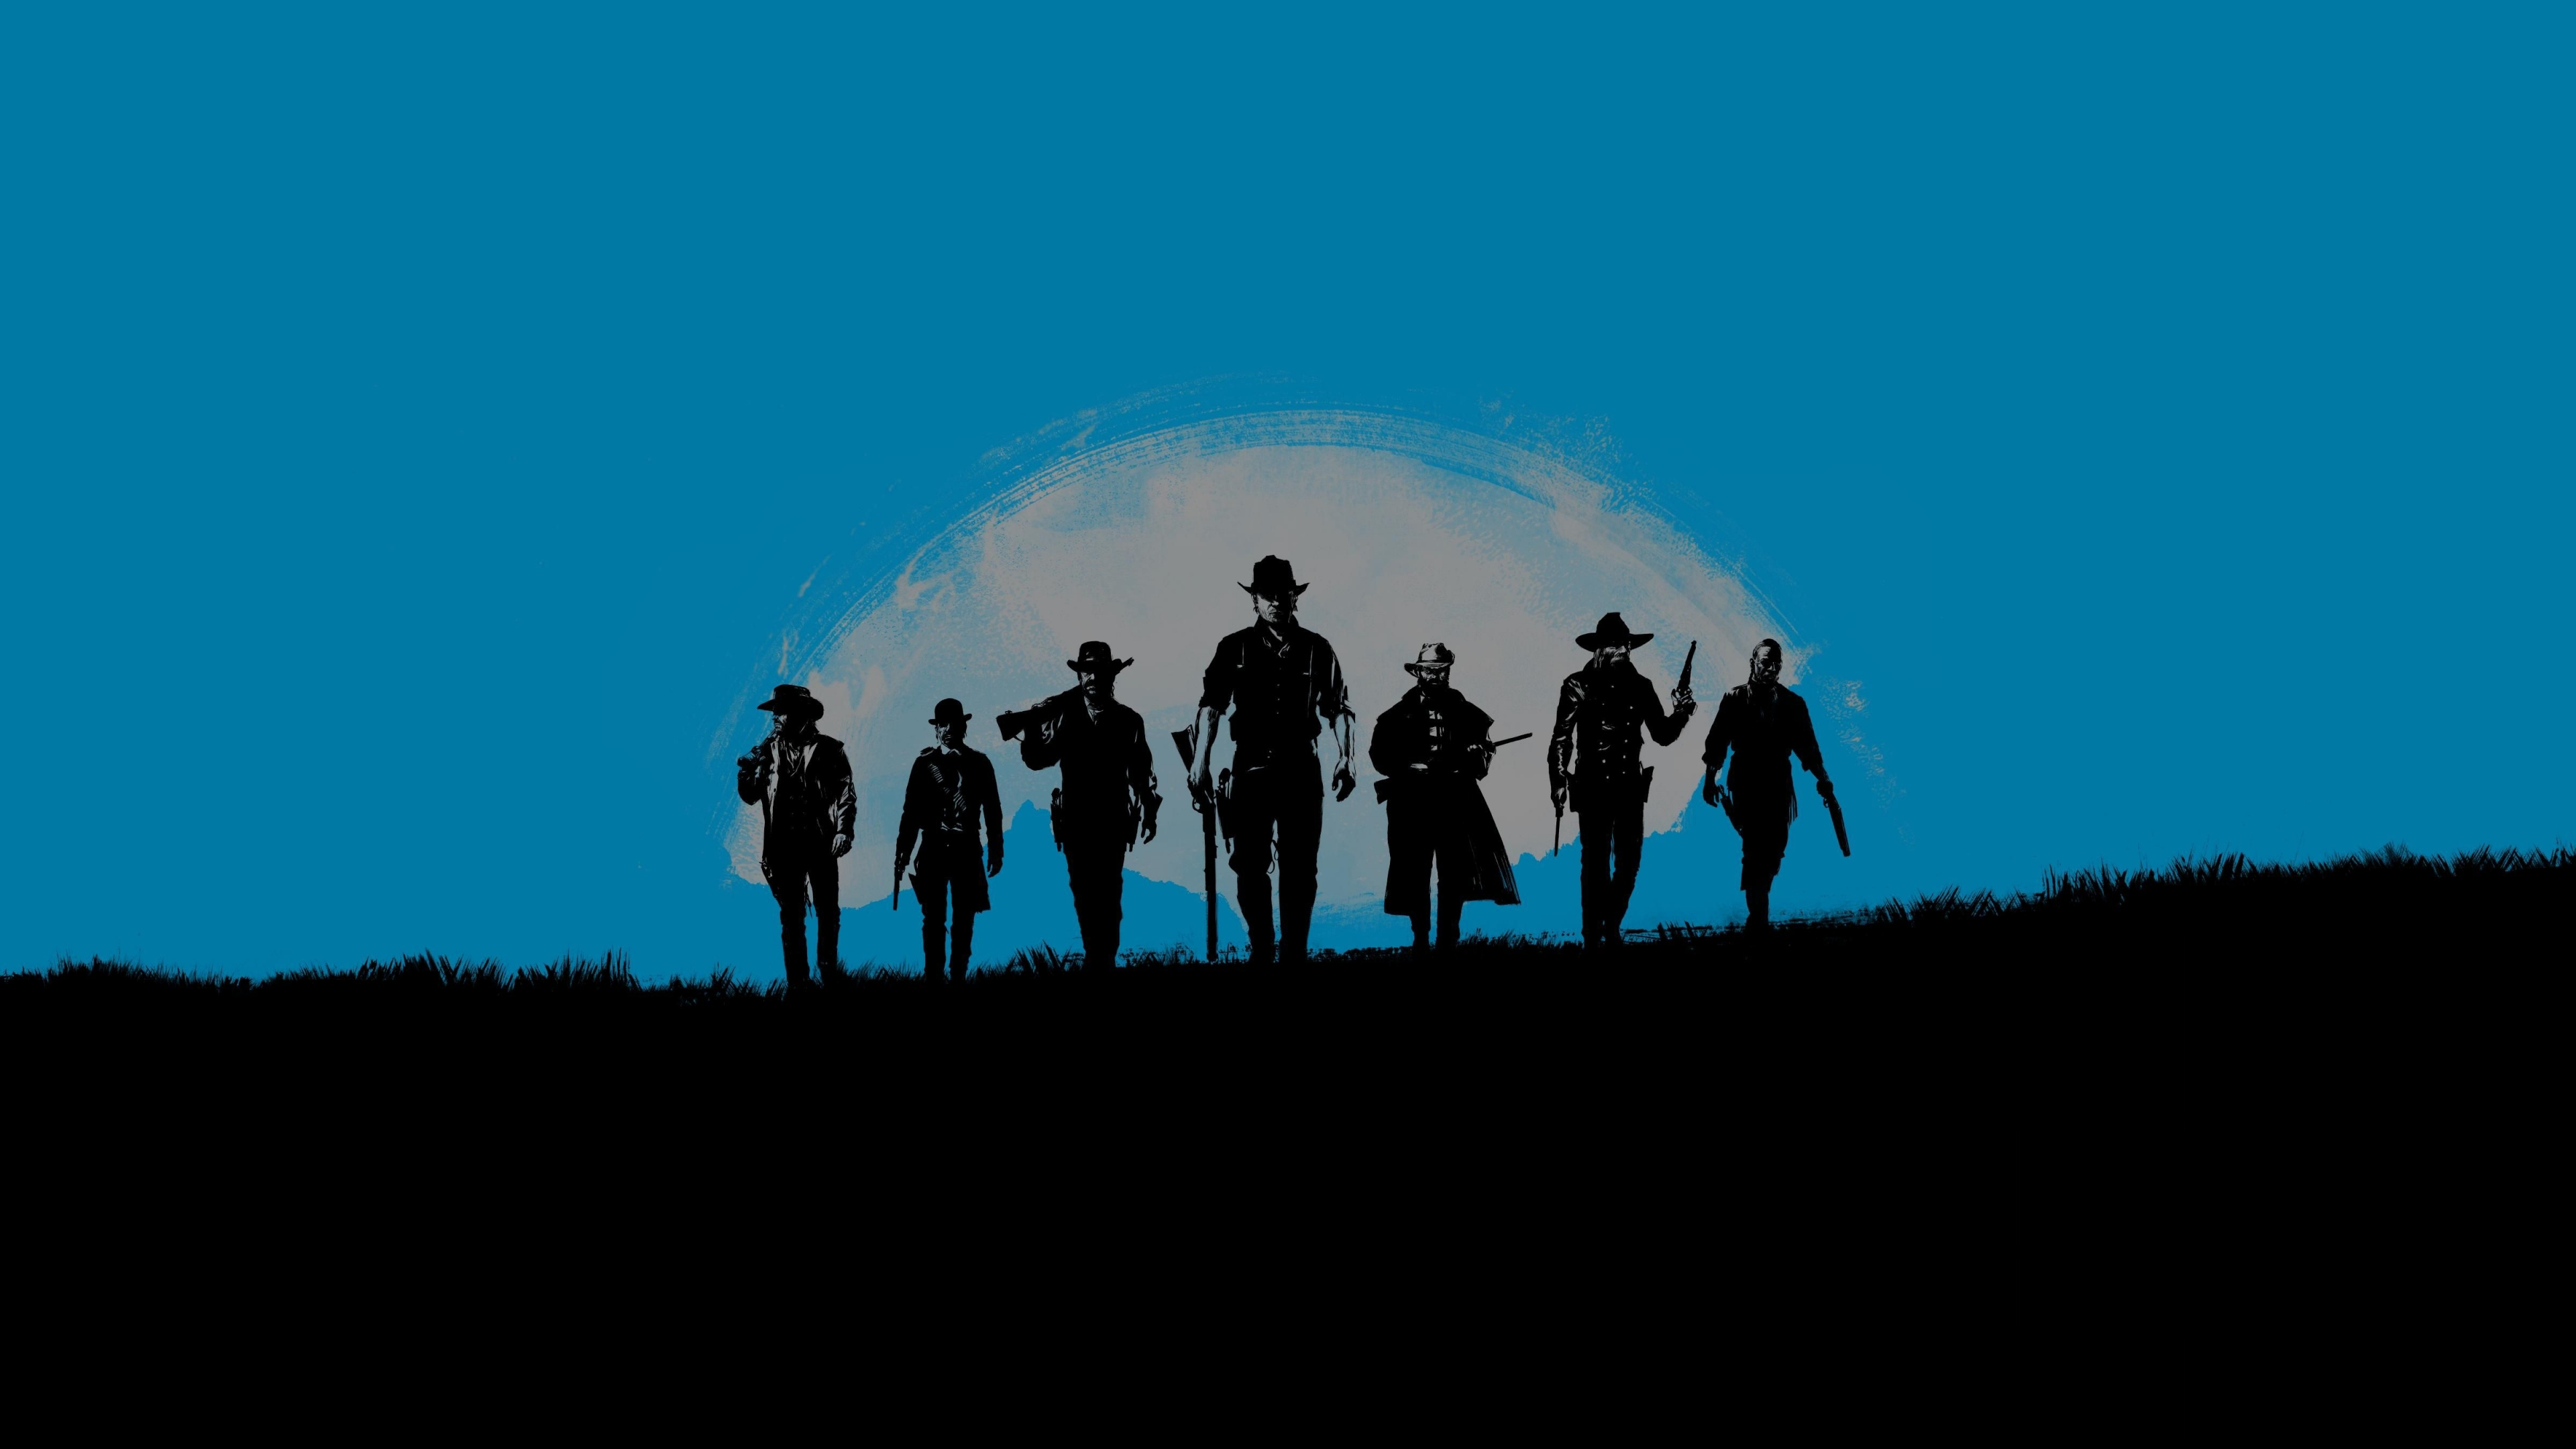 Red Dead Redemption 2 Wallpapers - Top 25 Best Red Dead Redemption 2  Backgrounds